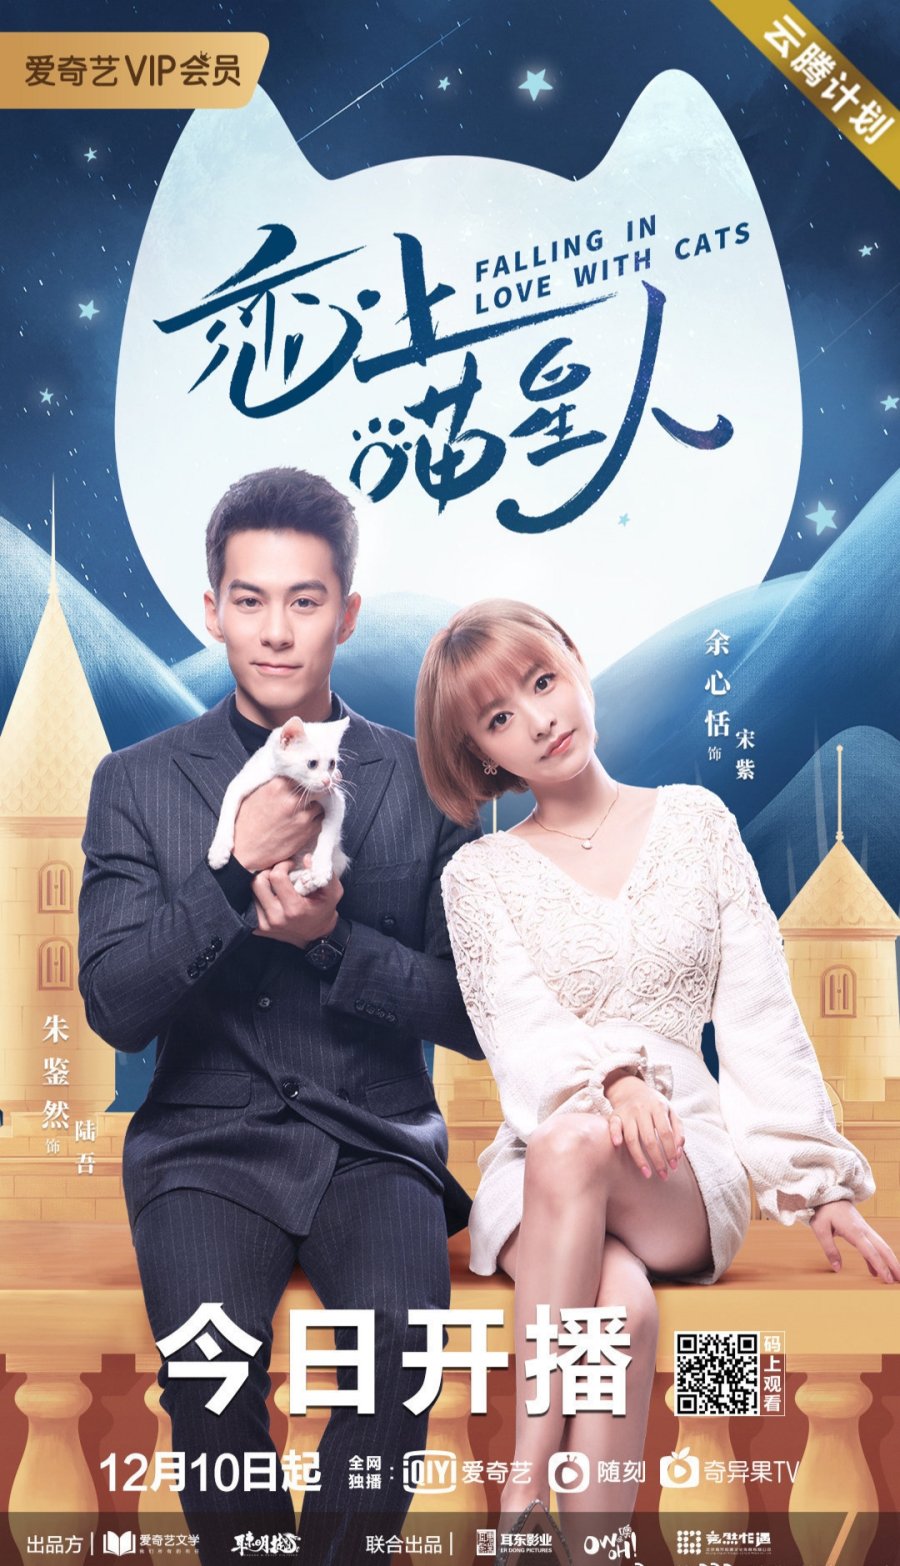 image poster from imdb - ​Falling in Love With Cats (2020)